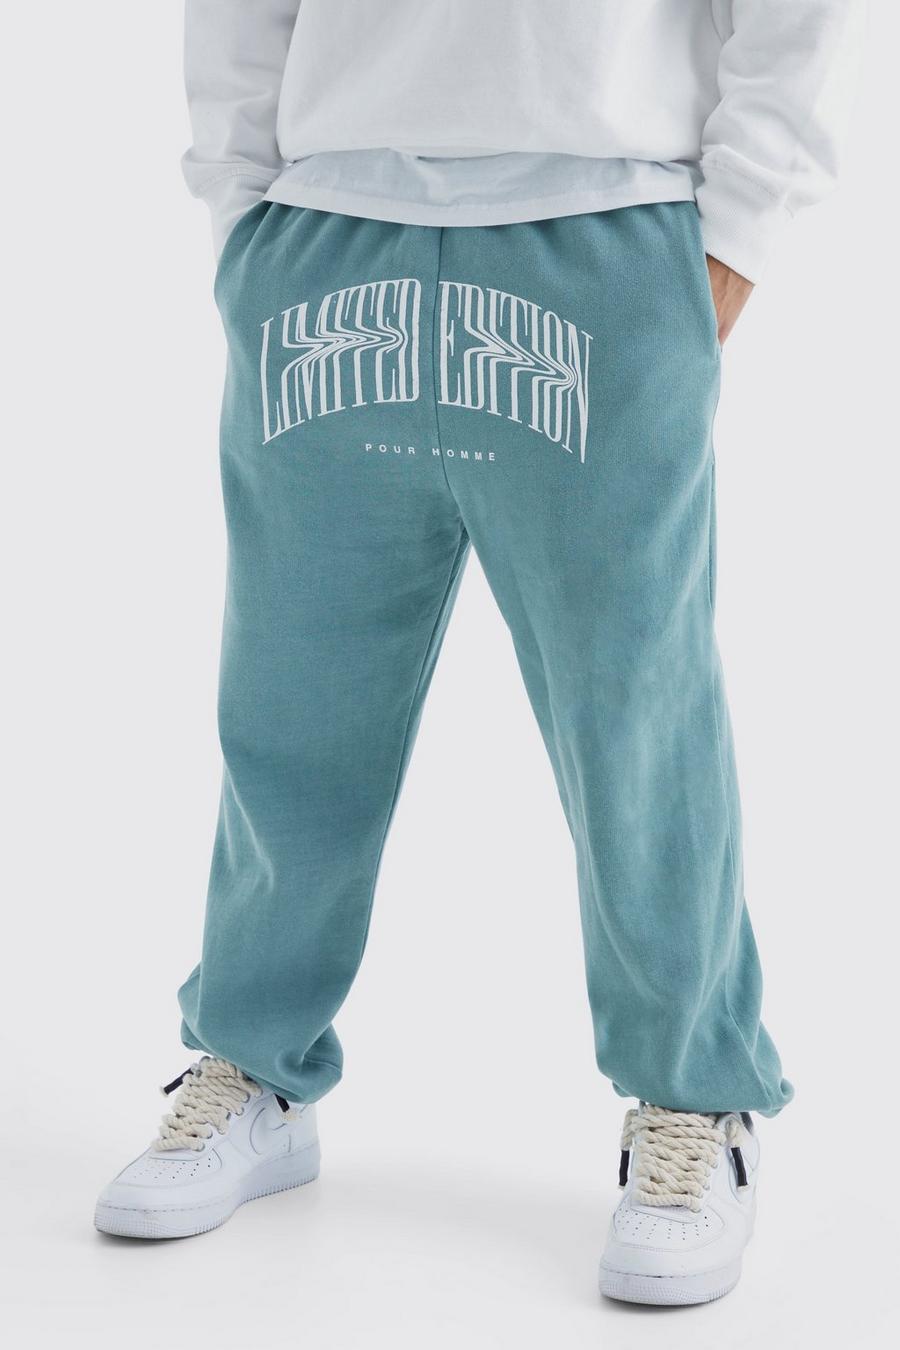 Sage Oversized Limited Crotch Graphic Jogger